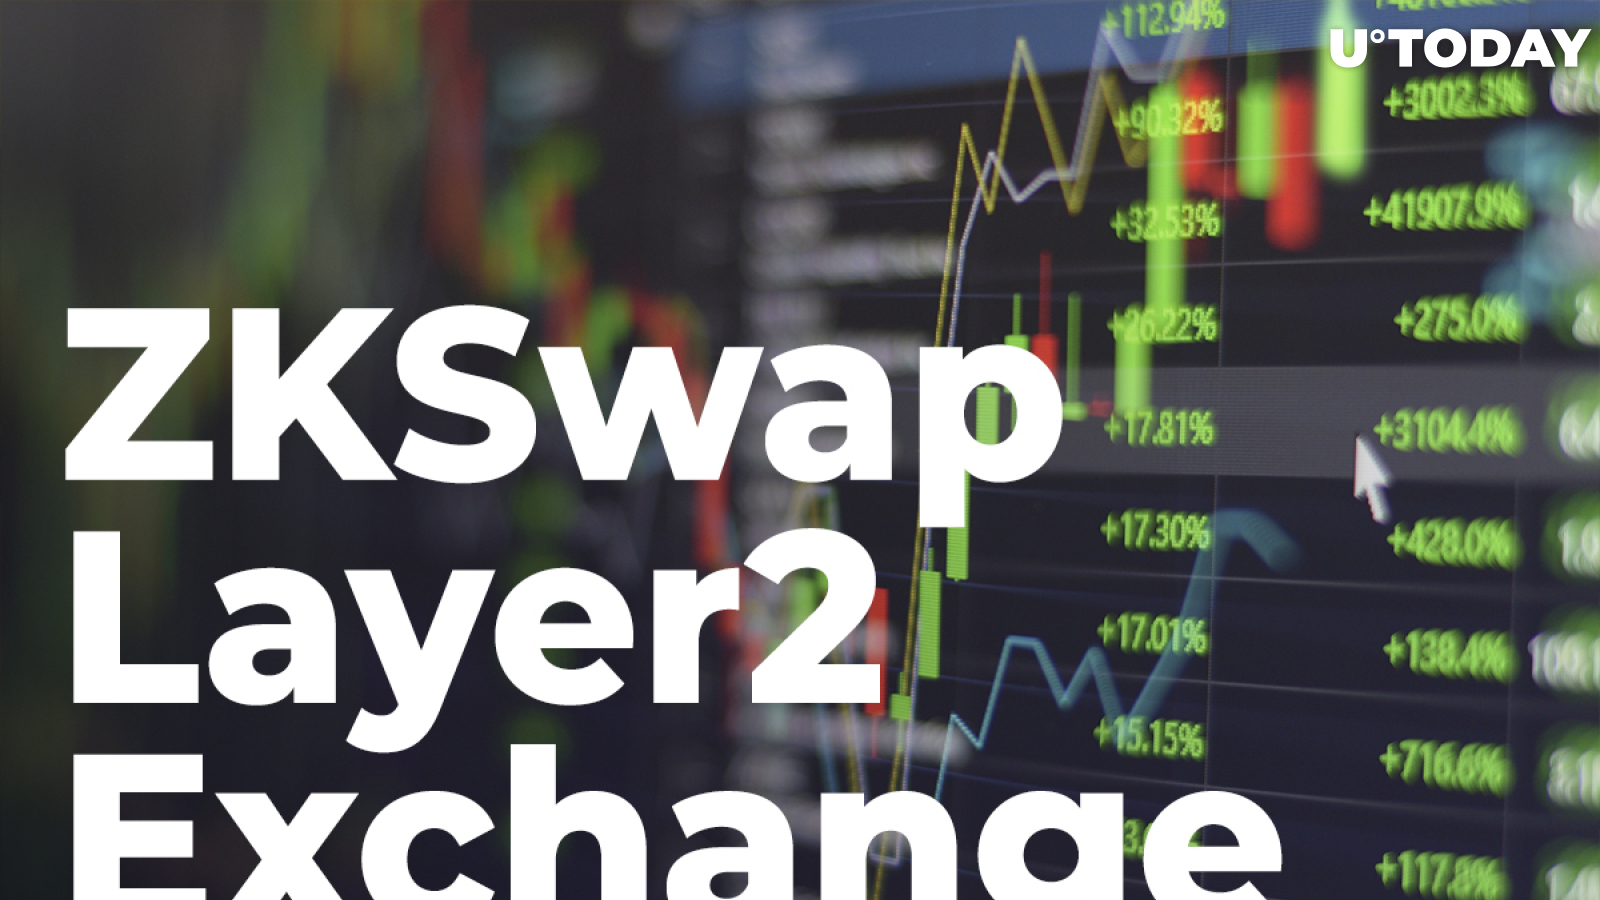 ZKSwap (ZKS) Layer2 Exchange Has its v2 Deployed to BSC Mainnet